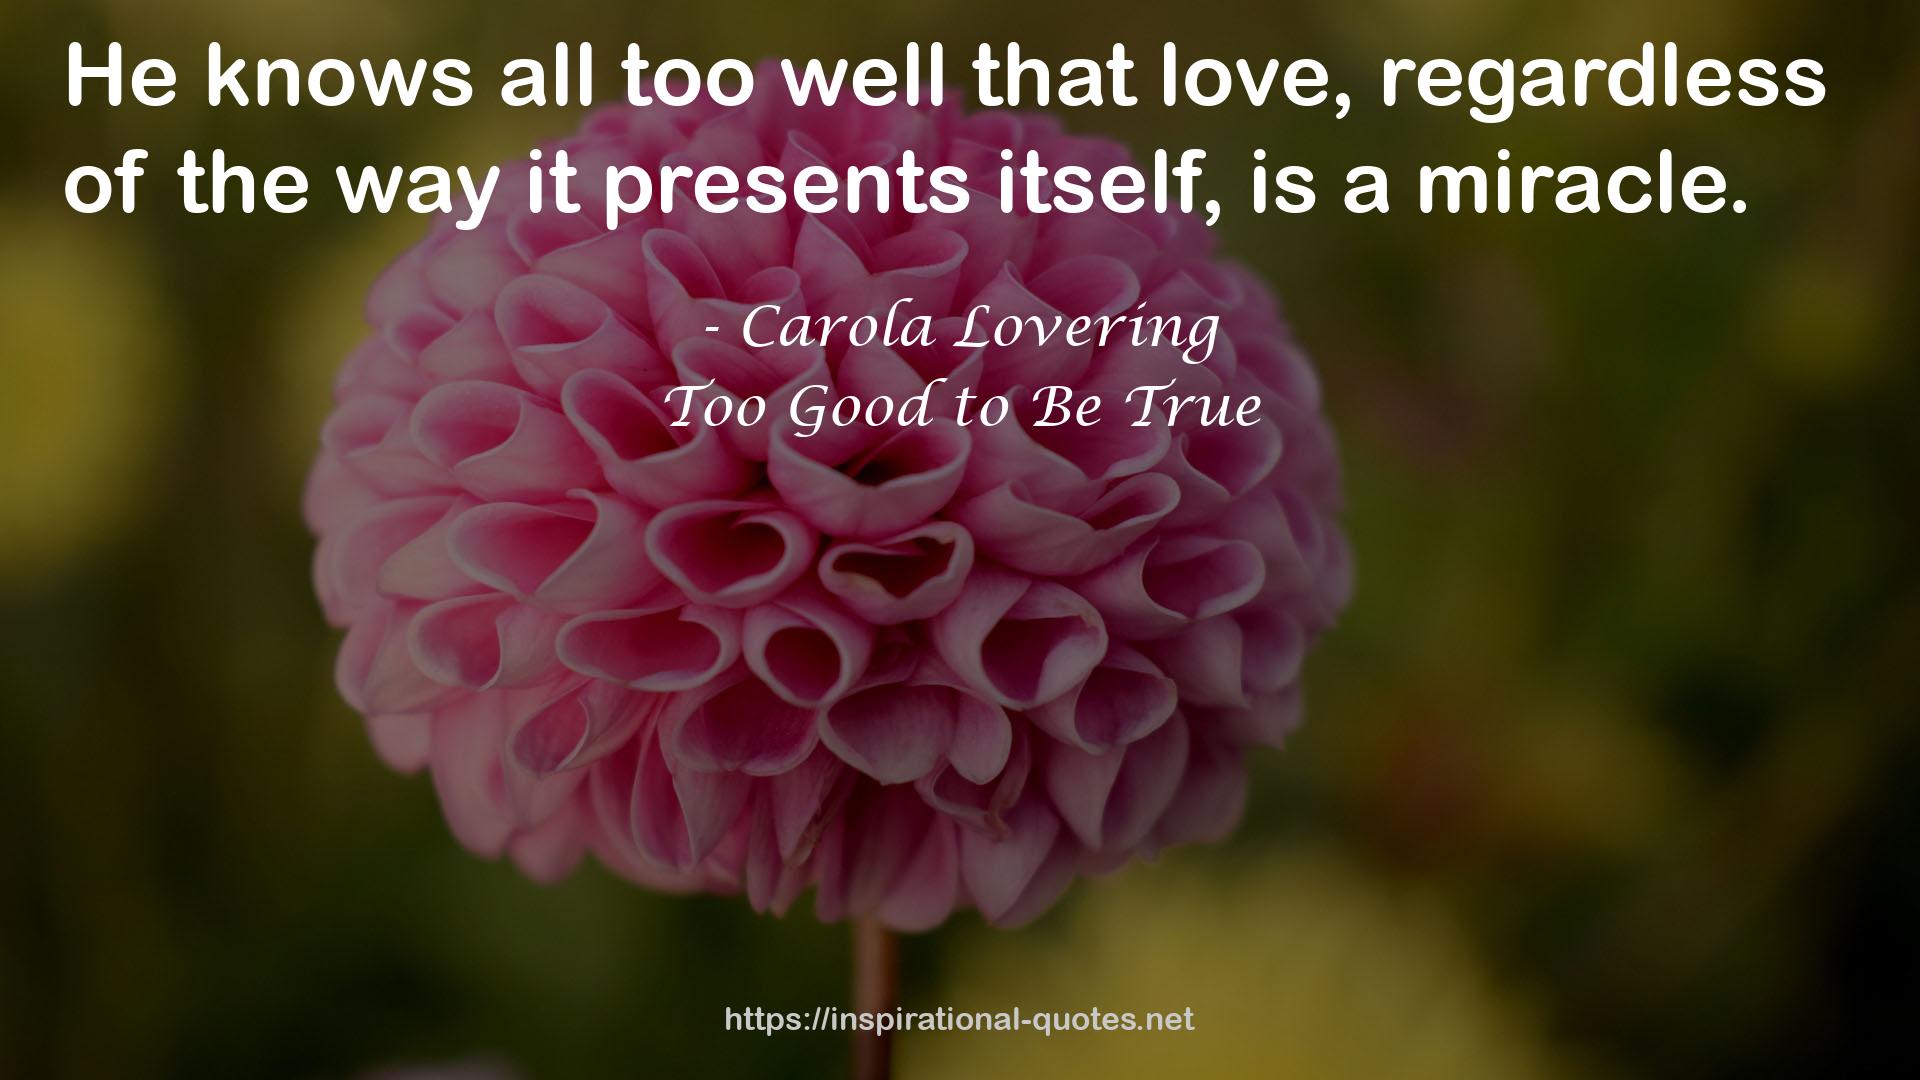 Too Good to Be True QUOTES